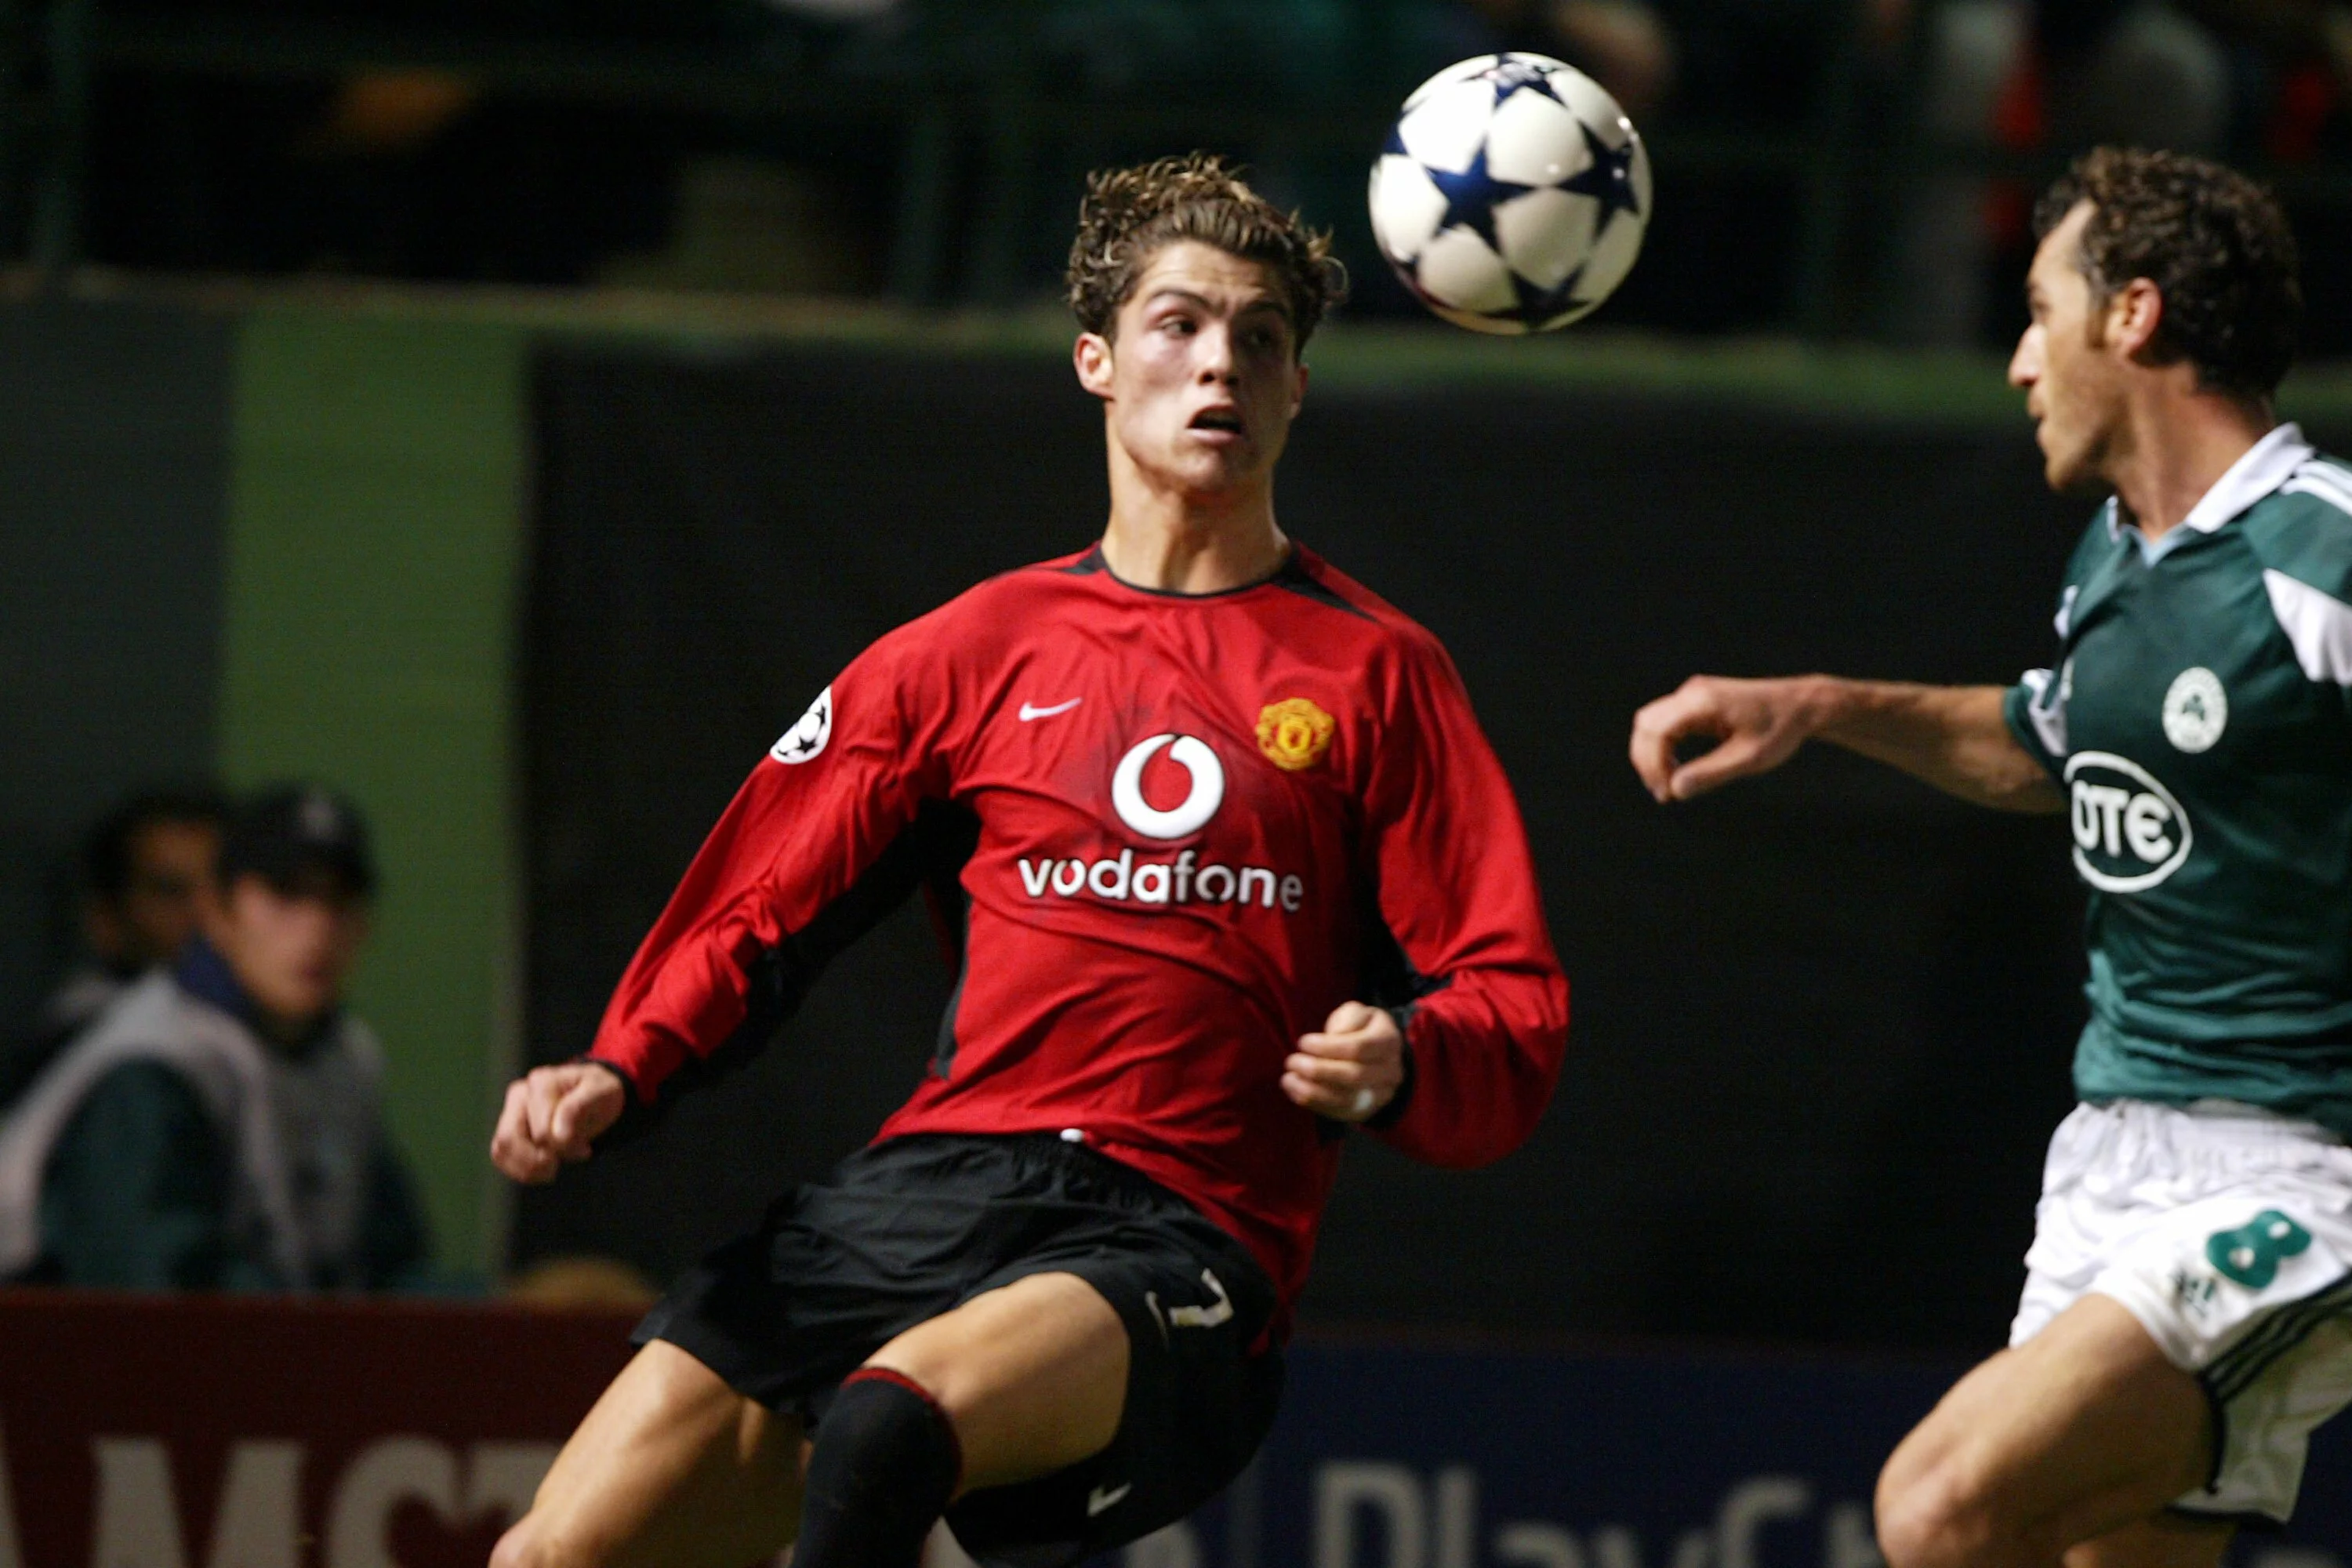 Story Of Cristiano Ronaldo's Dedication When He First Became A Pro - FootyNews.co.uk